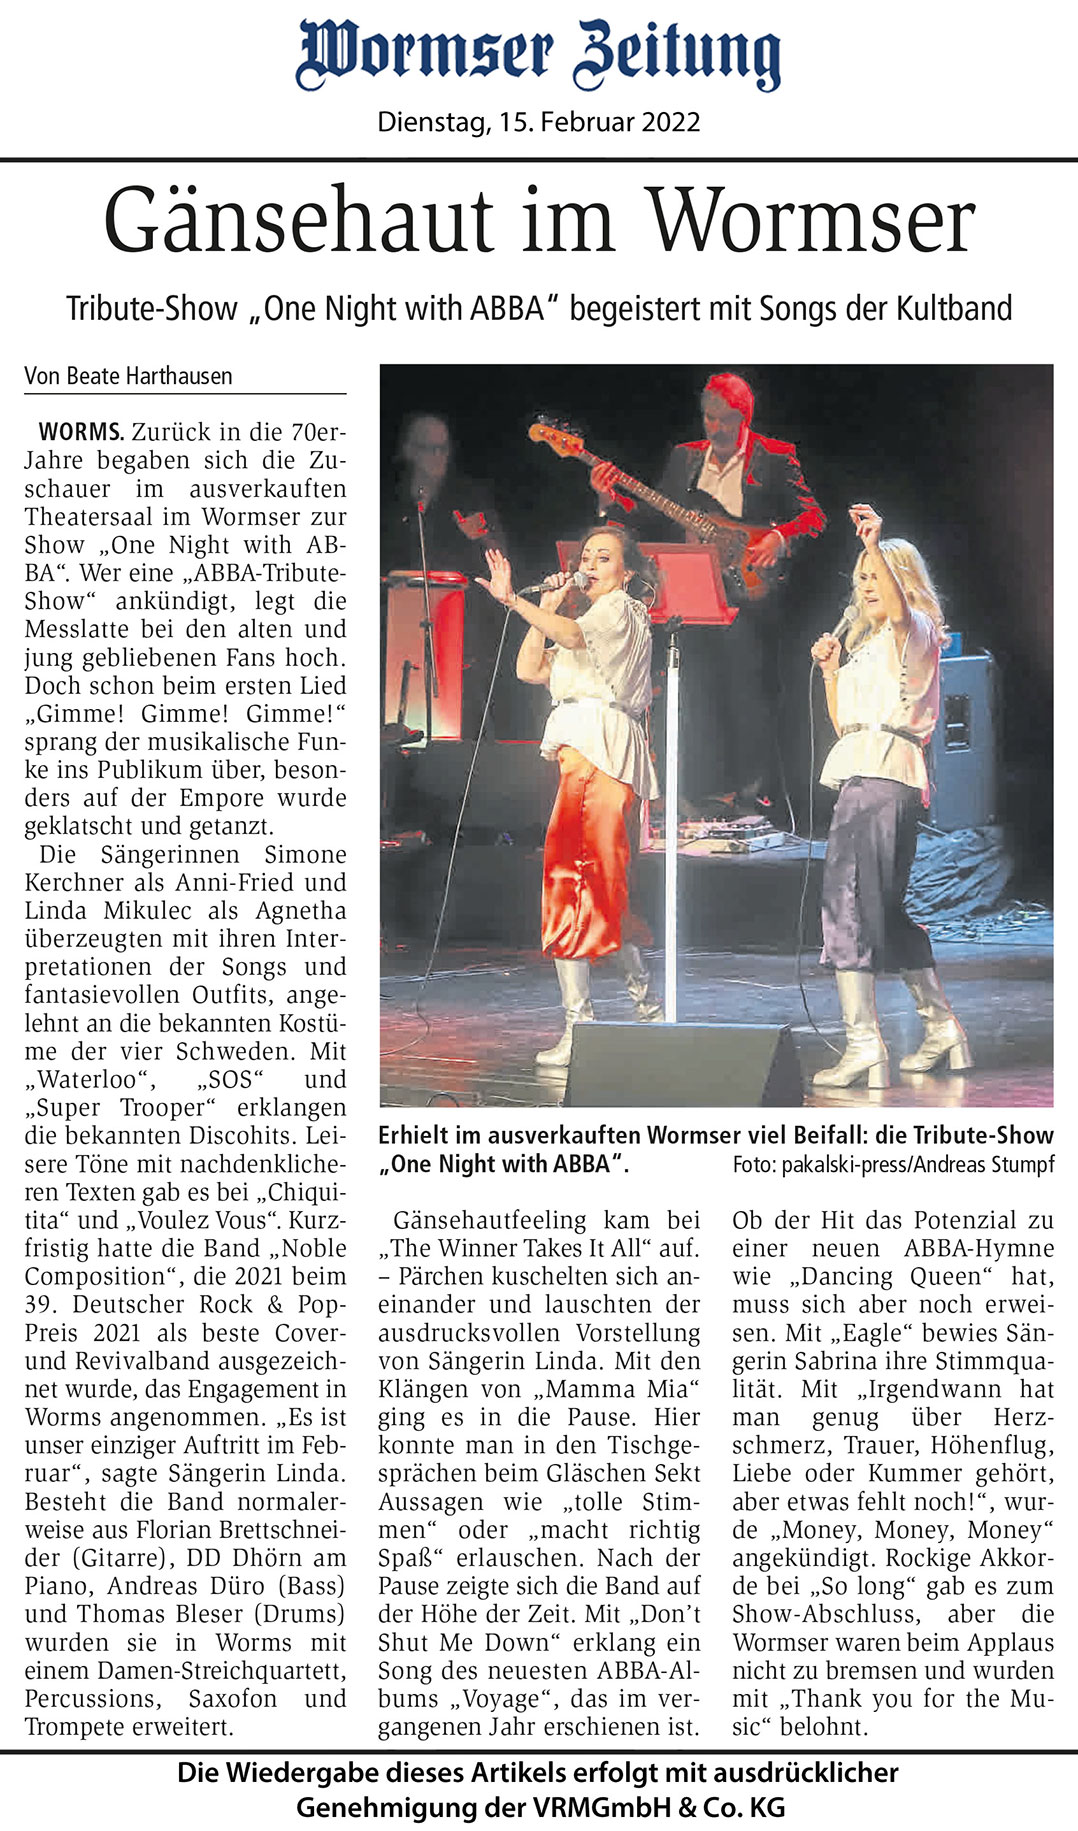 Worma-Tribute-Show-ONE_NIGHT_WITH_ABBA-begeistert-mit Songs-der-Kultband-2022.pdf